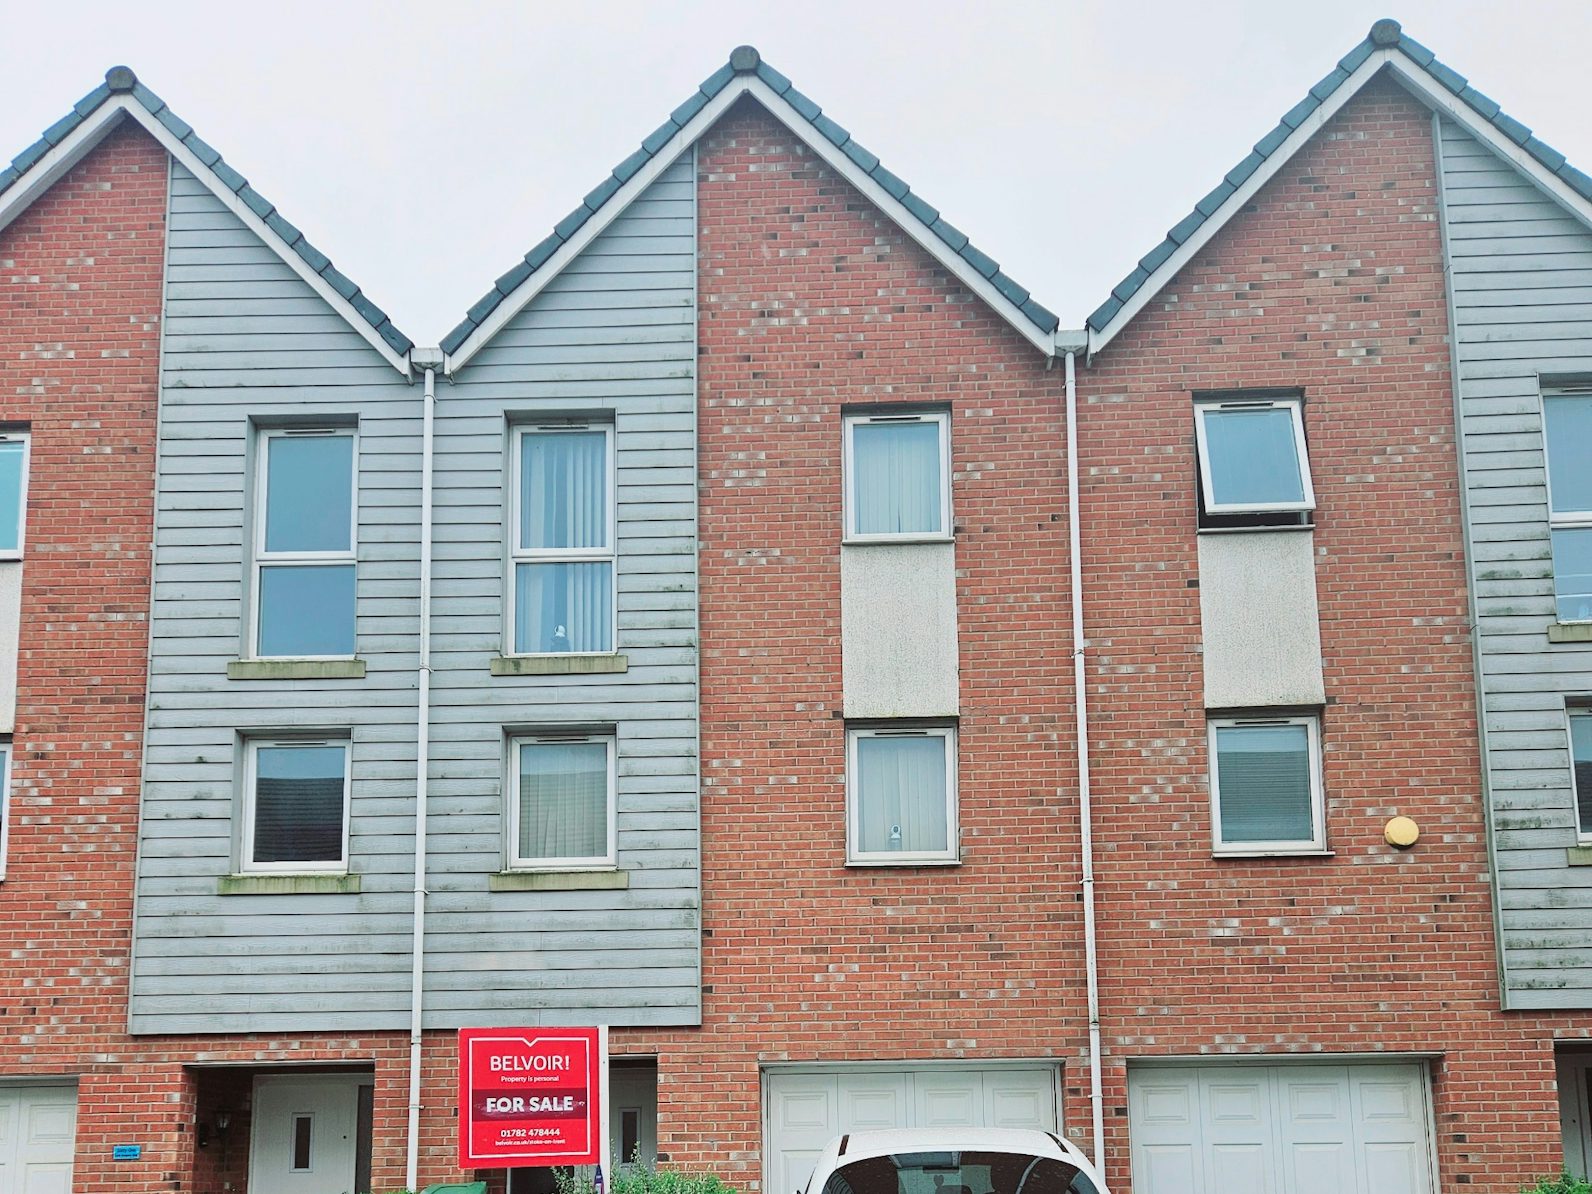 Town House for sale on Lock Keepers Way Hanley, Stoke-on-Trent, ST1